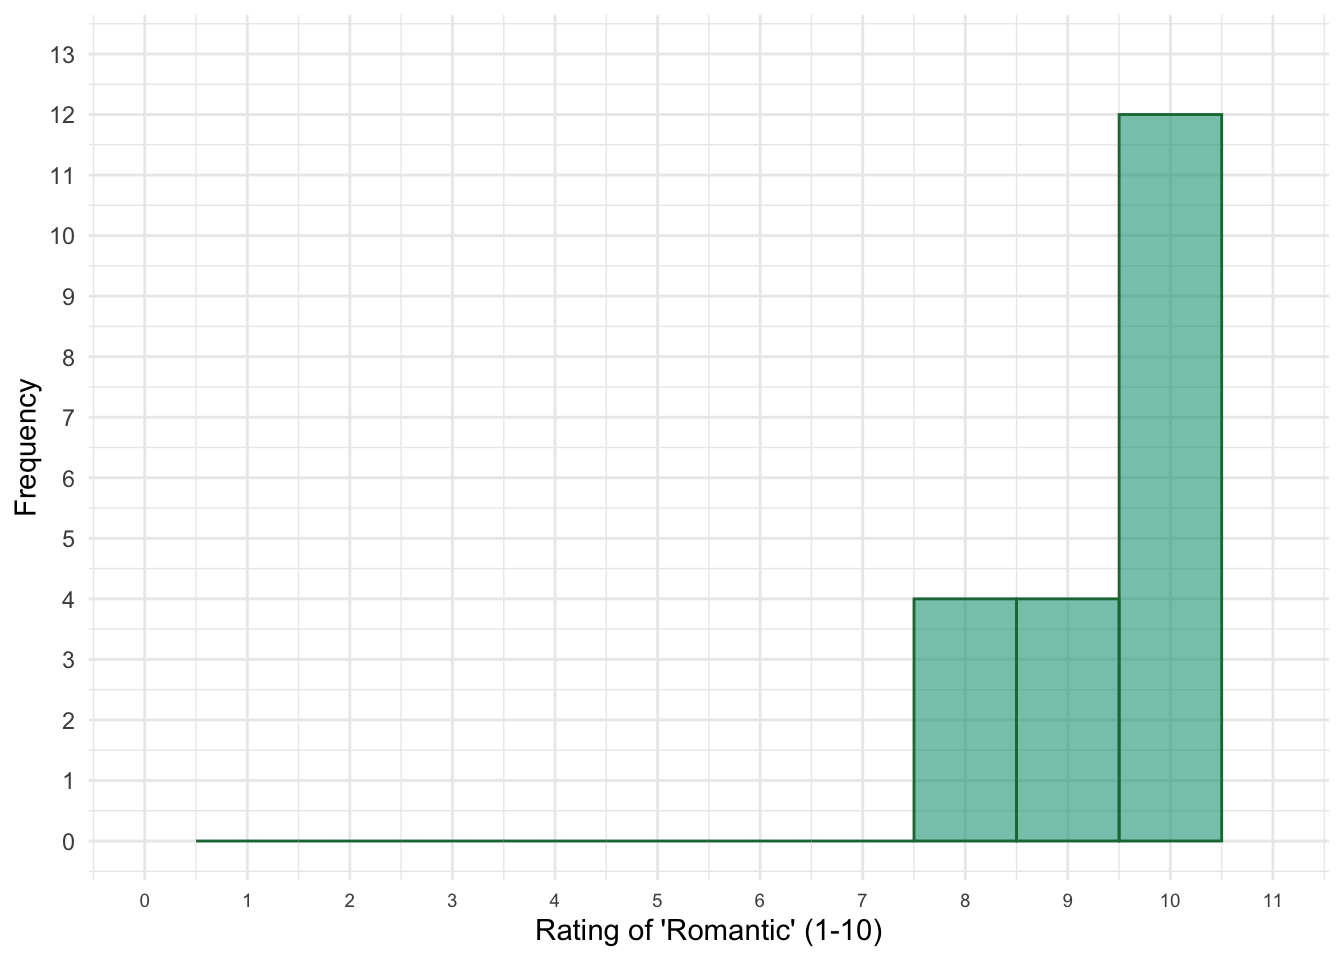 Figure 3.11 (reproduced): Histogram of the ratings for the characteristic 'honesty'